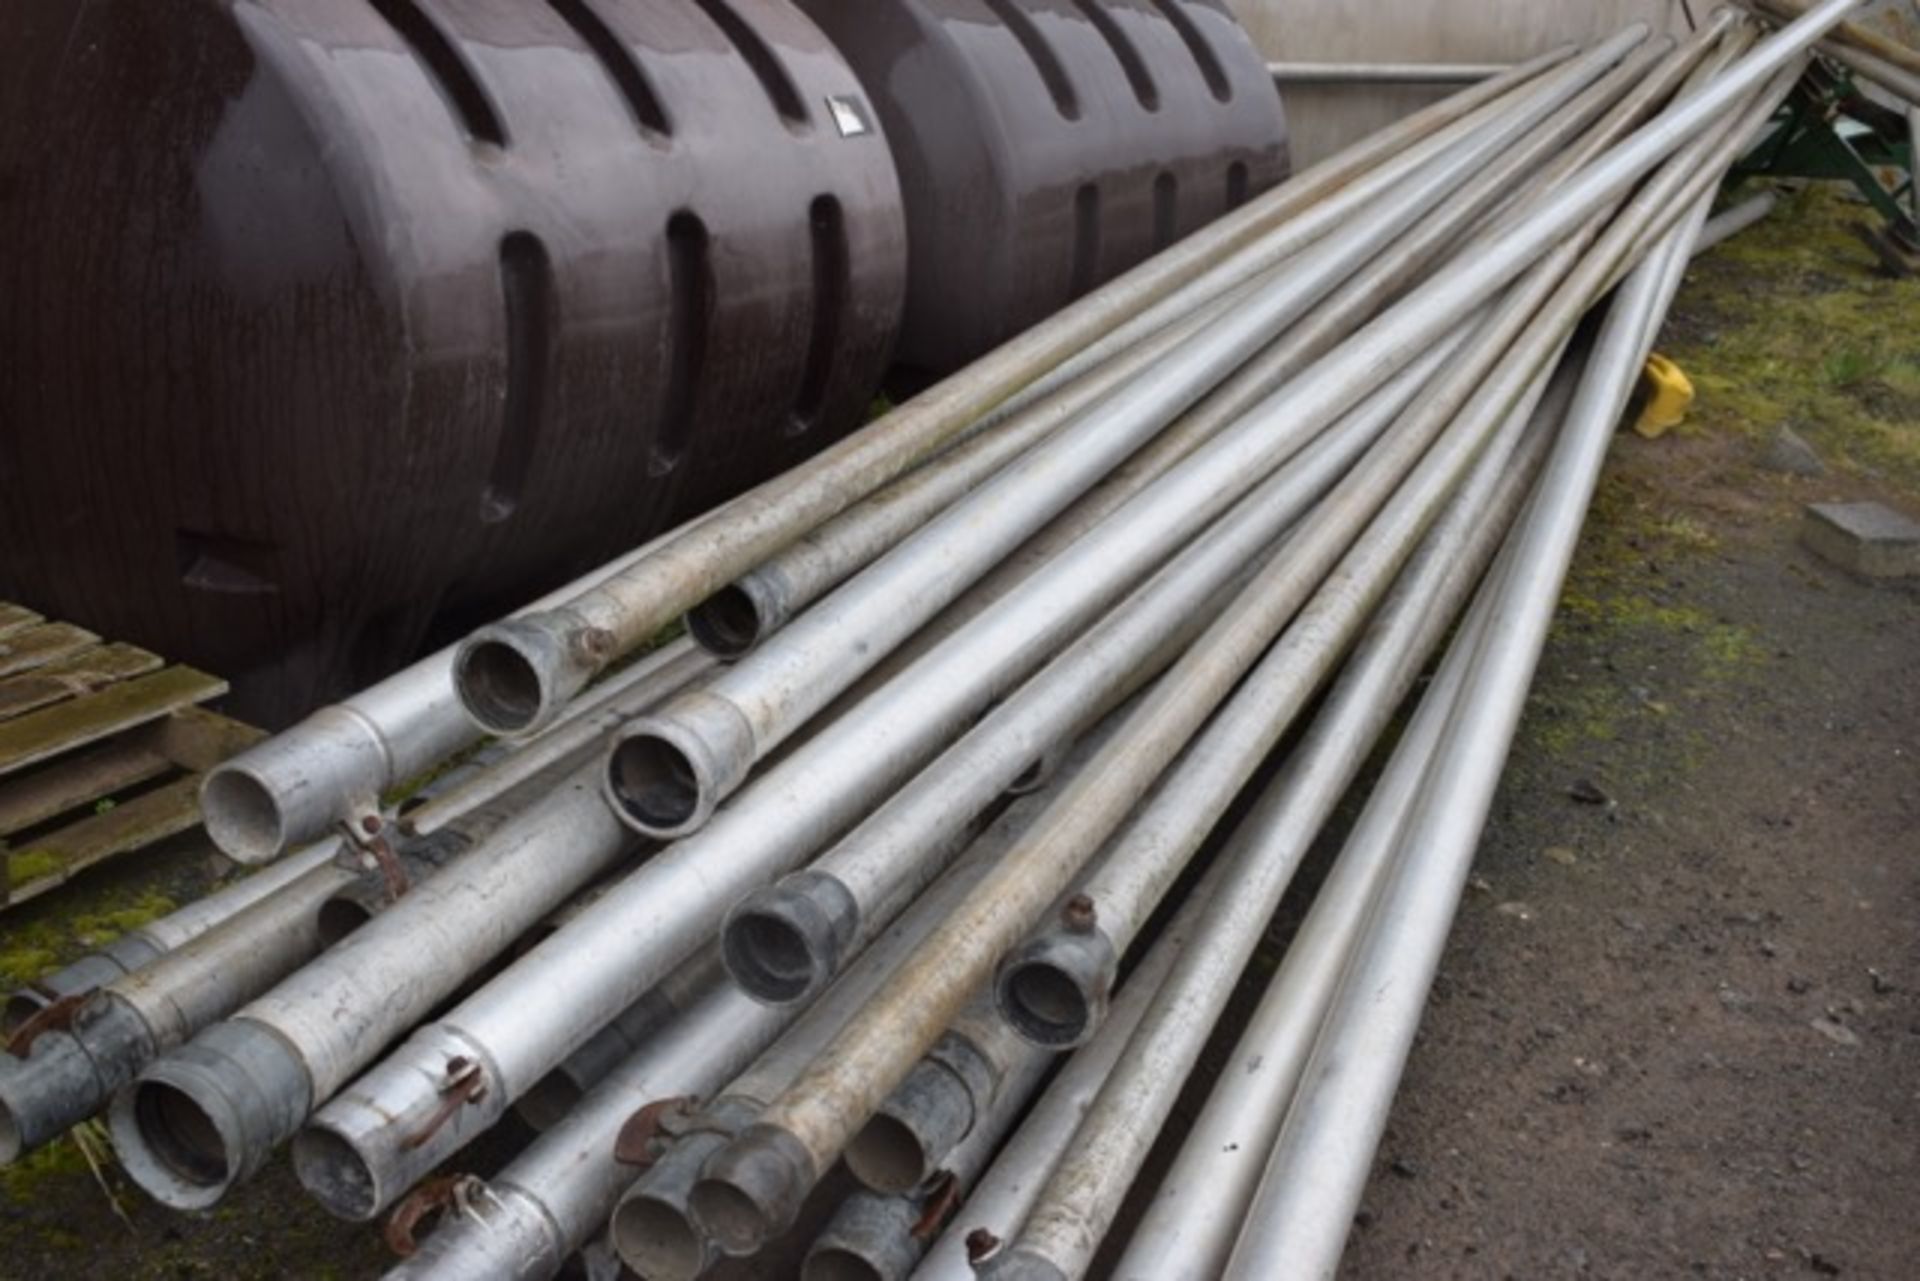 Selection of Irrigation Piping